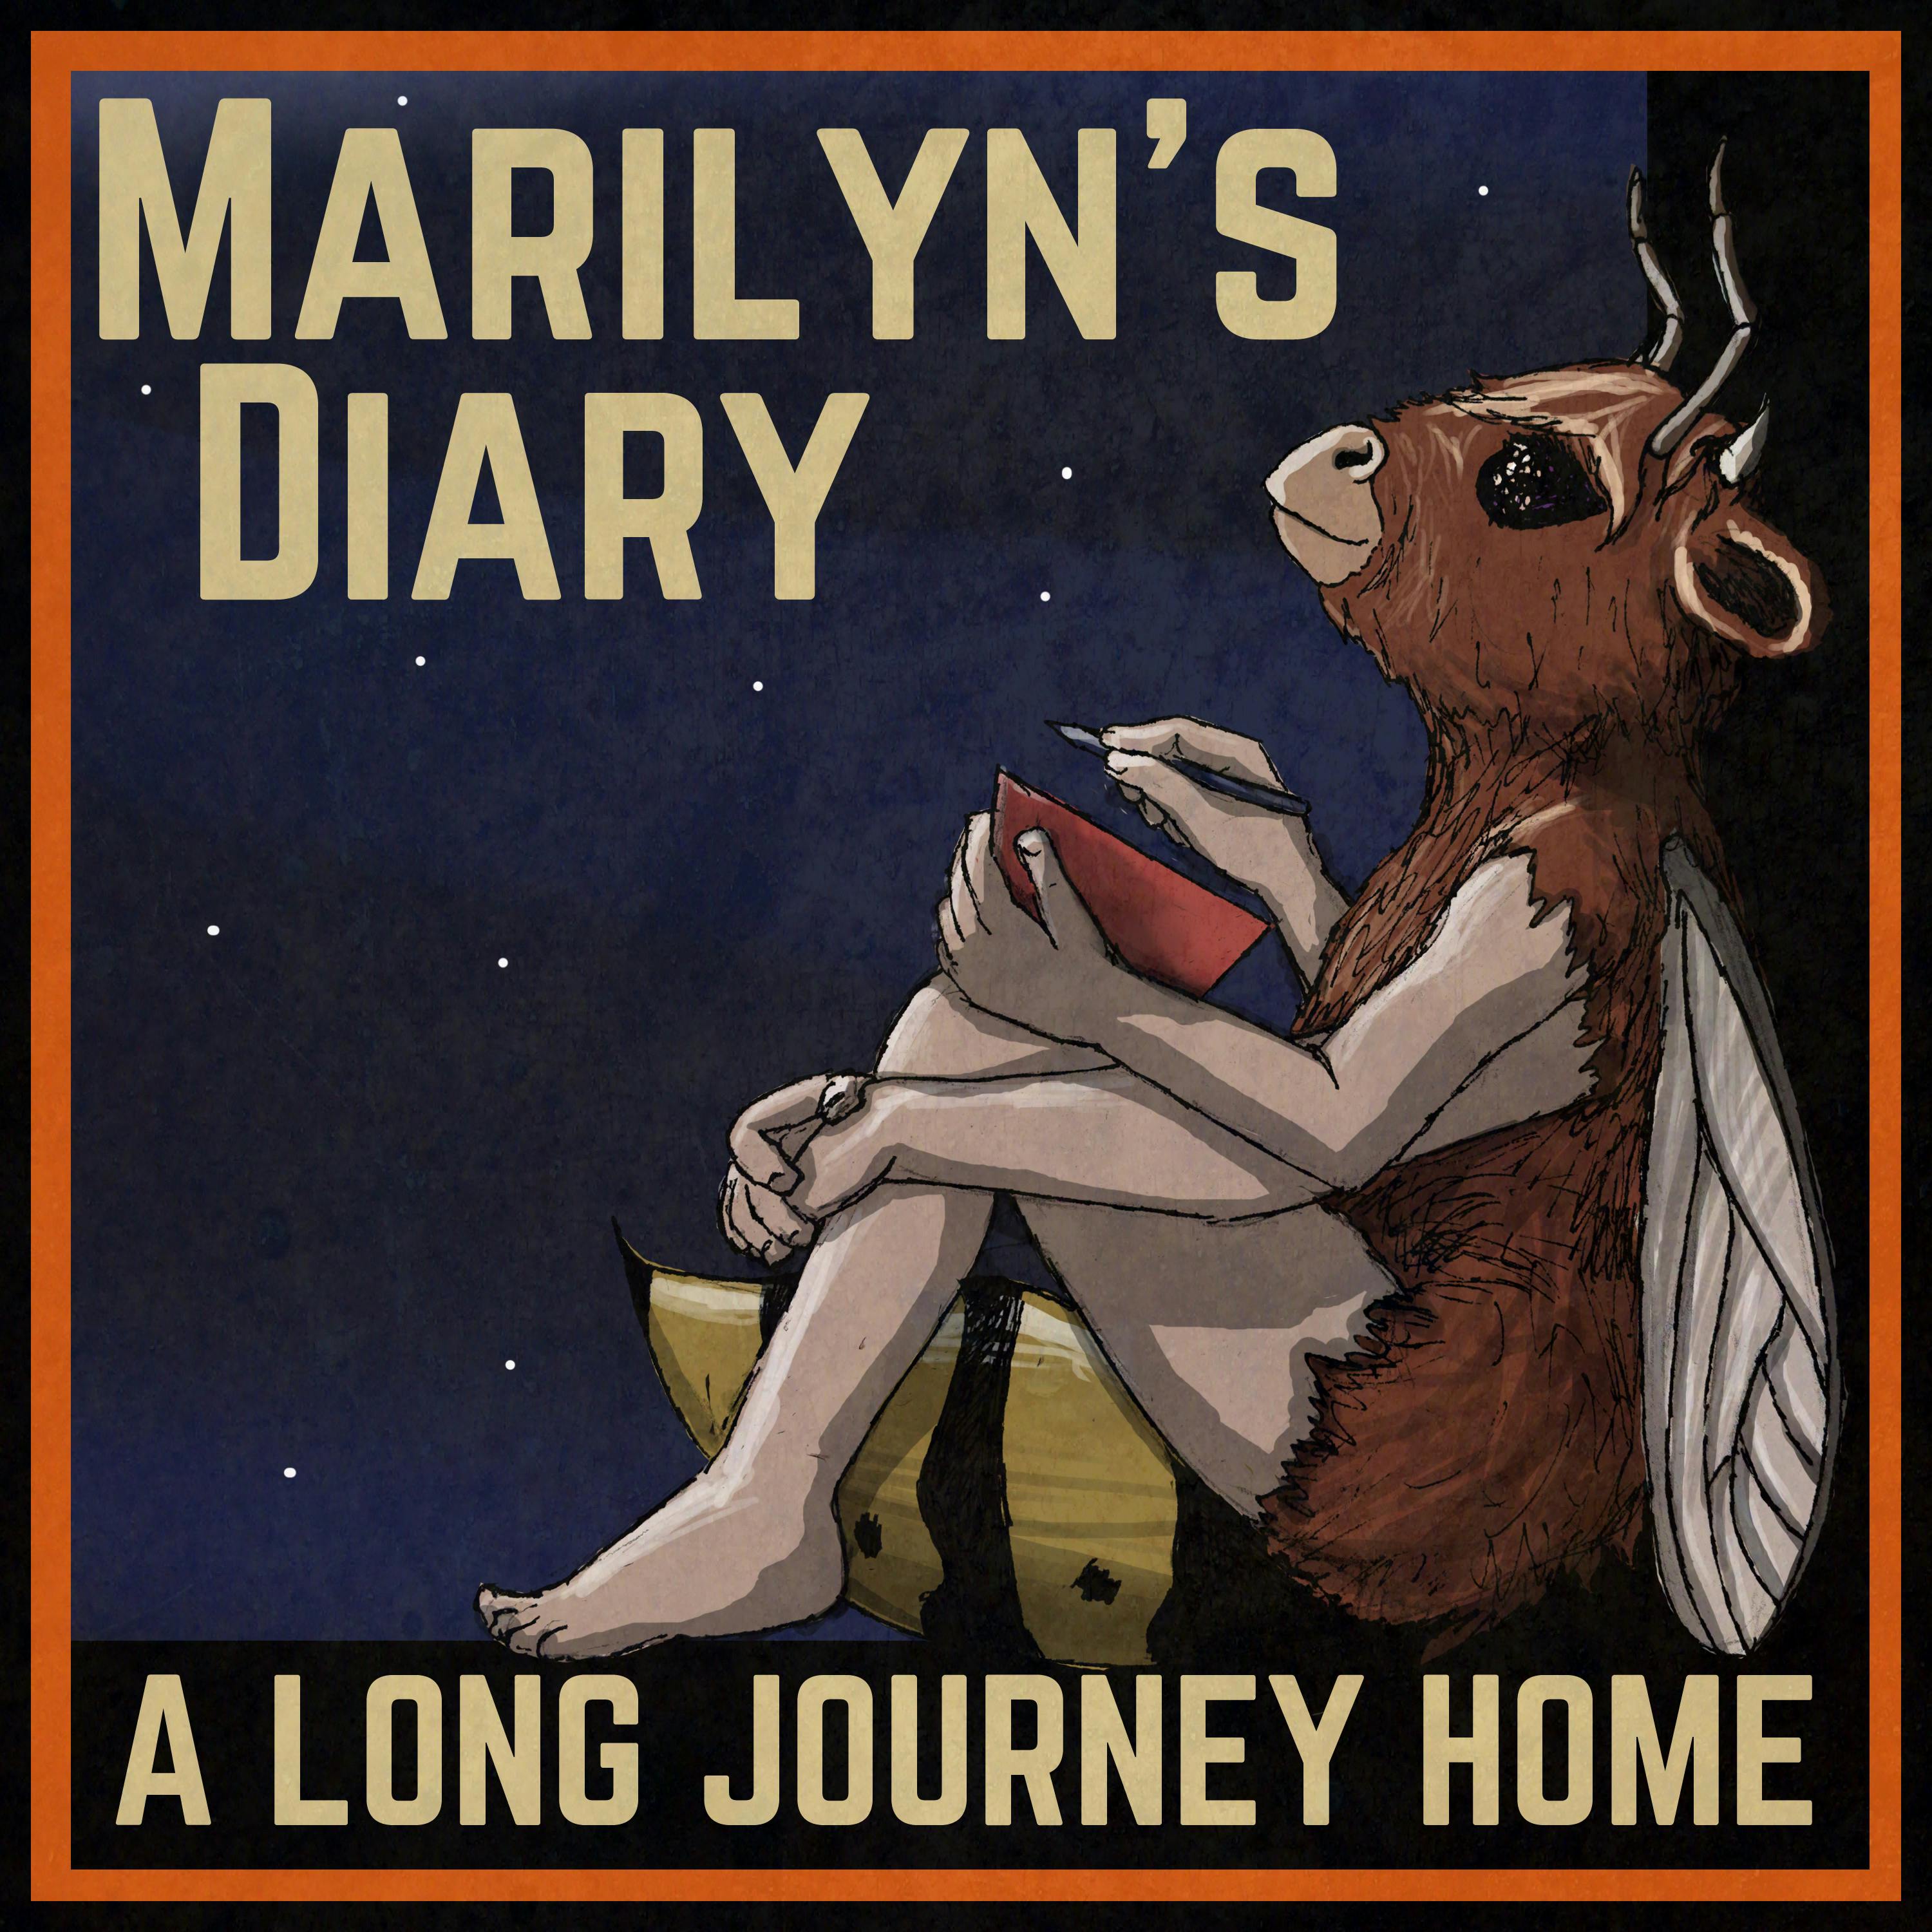 Marilyn’s Diary: A Long Journey Home - E05